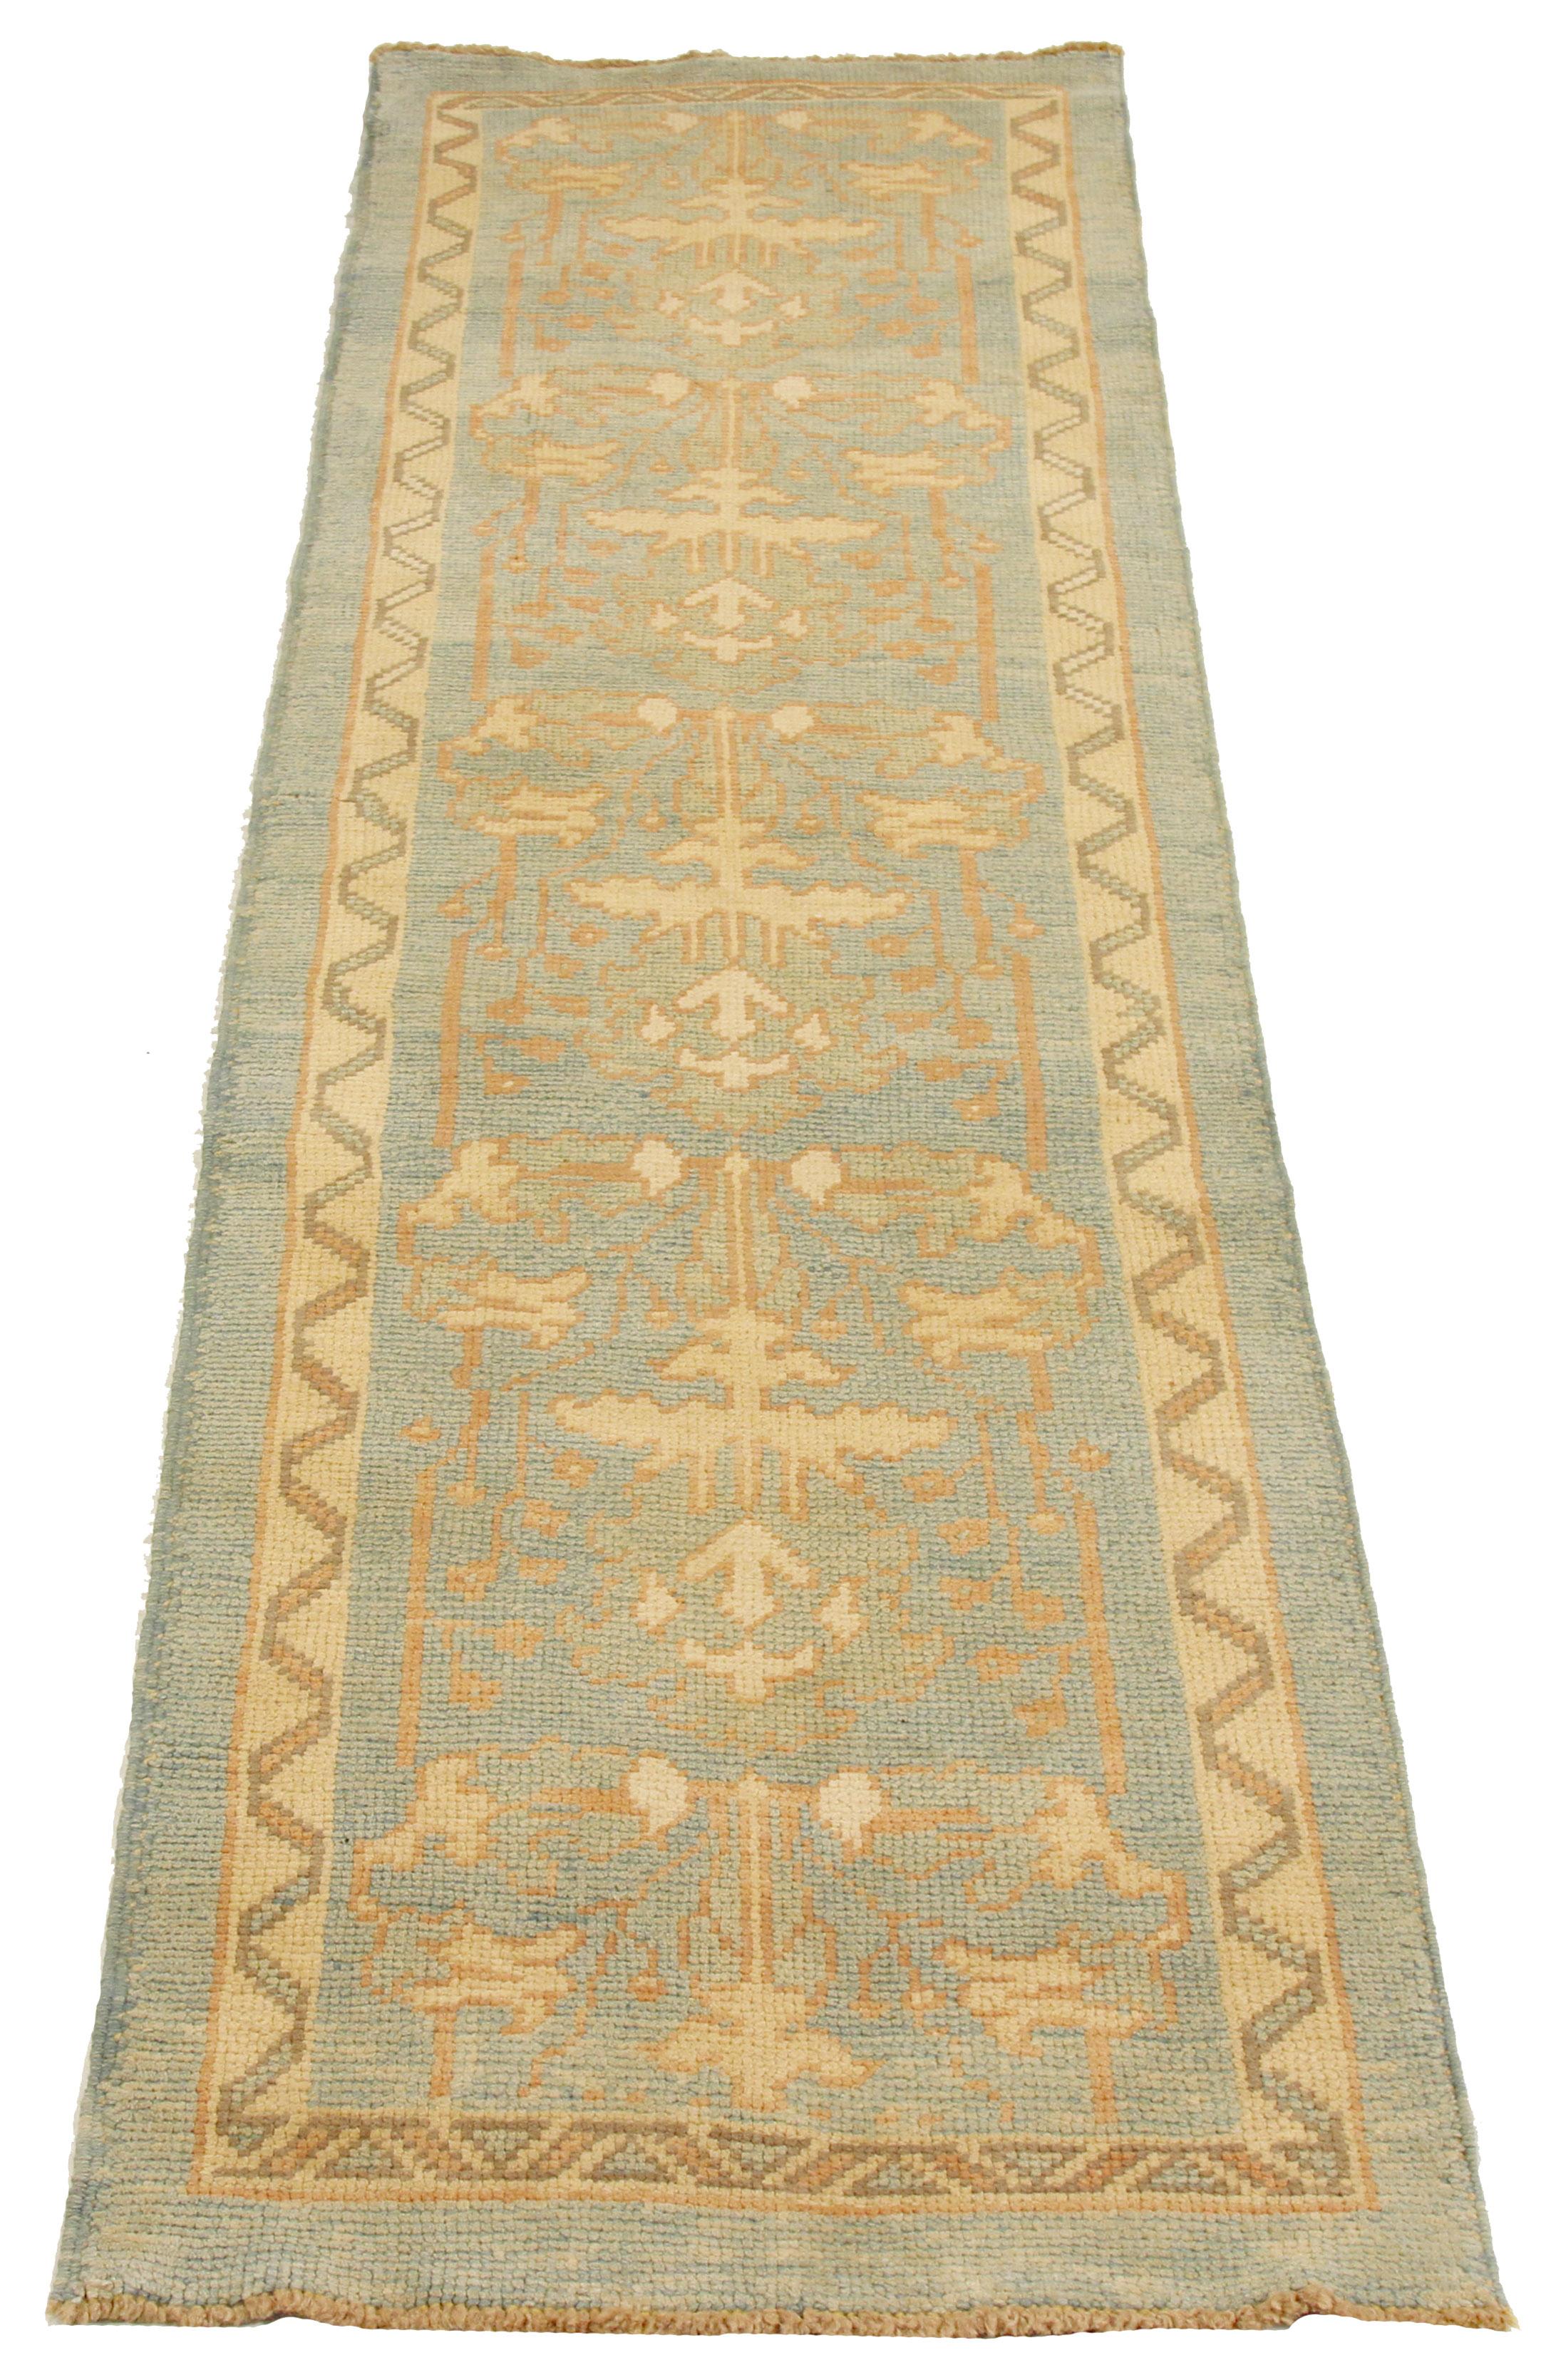 Contemporary handmade Turkish rug from high-quality sheep’s wool and colored with eco-friendly vegetable dyes that are proven safe for humans and pets alike. It’s a Donegal design showcasing a light blue field with beautiful ivory and brown